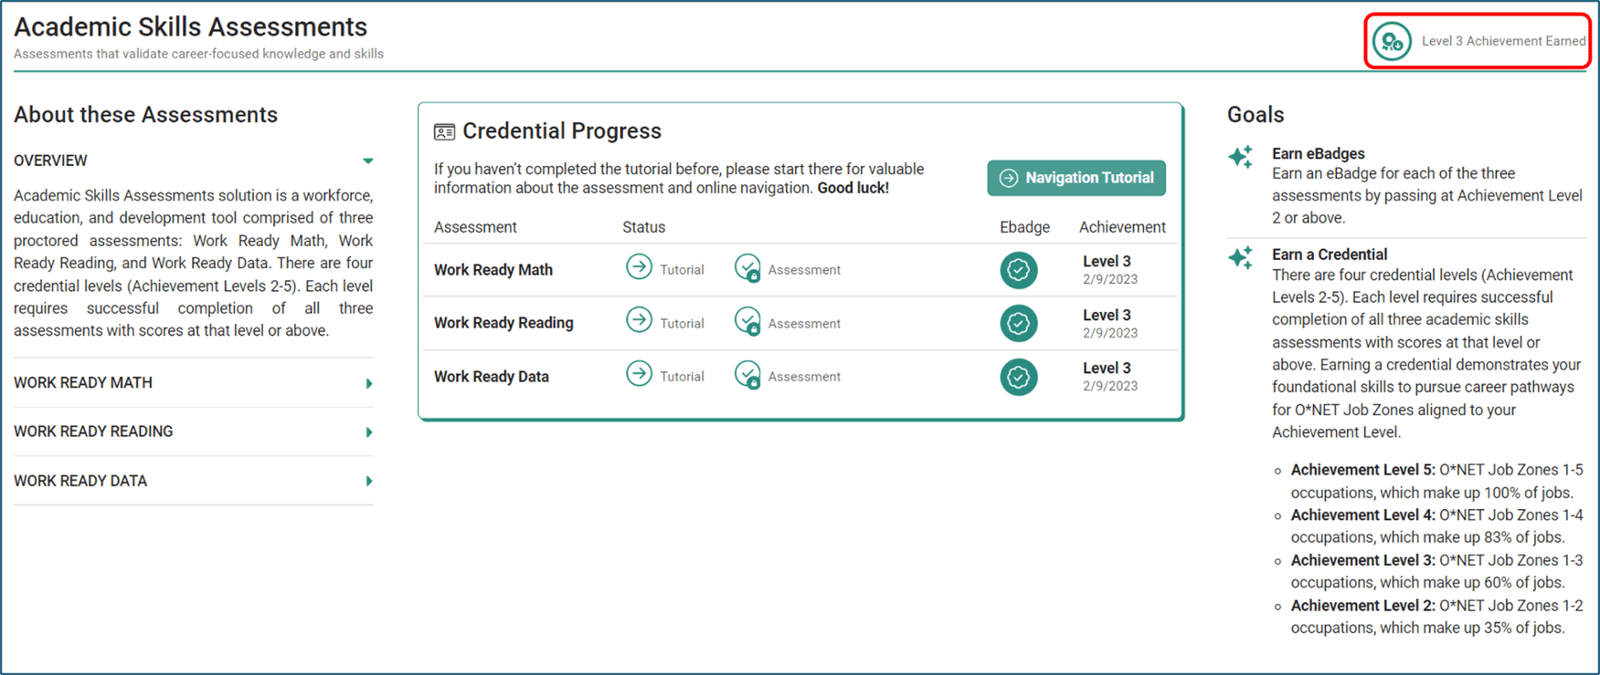 Image of the Academic Skills Assessments landing page showing all three assessments complete with an Achievement Level 3 earned.